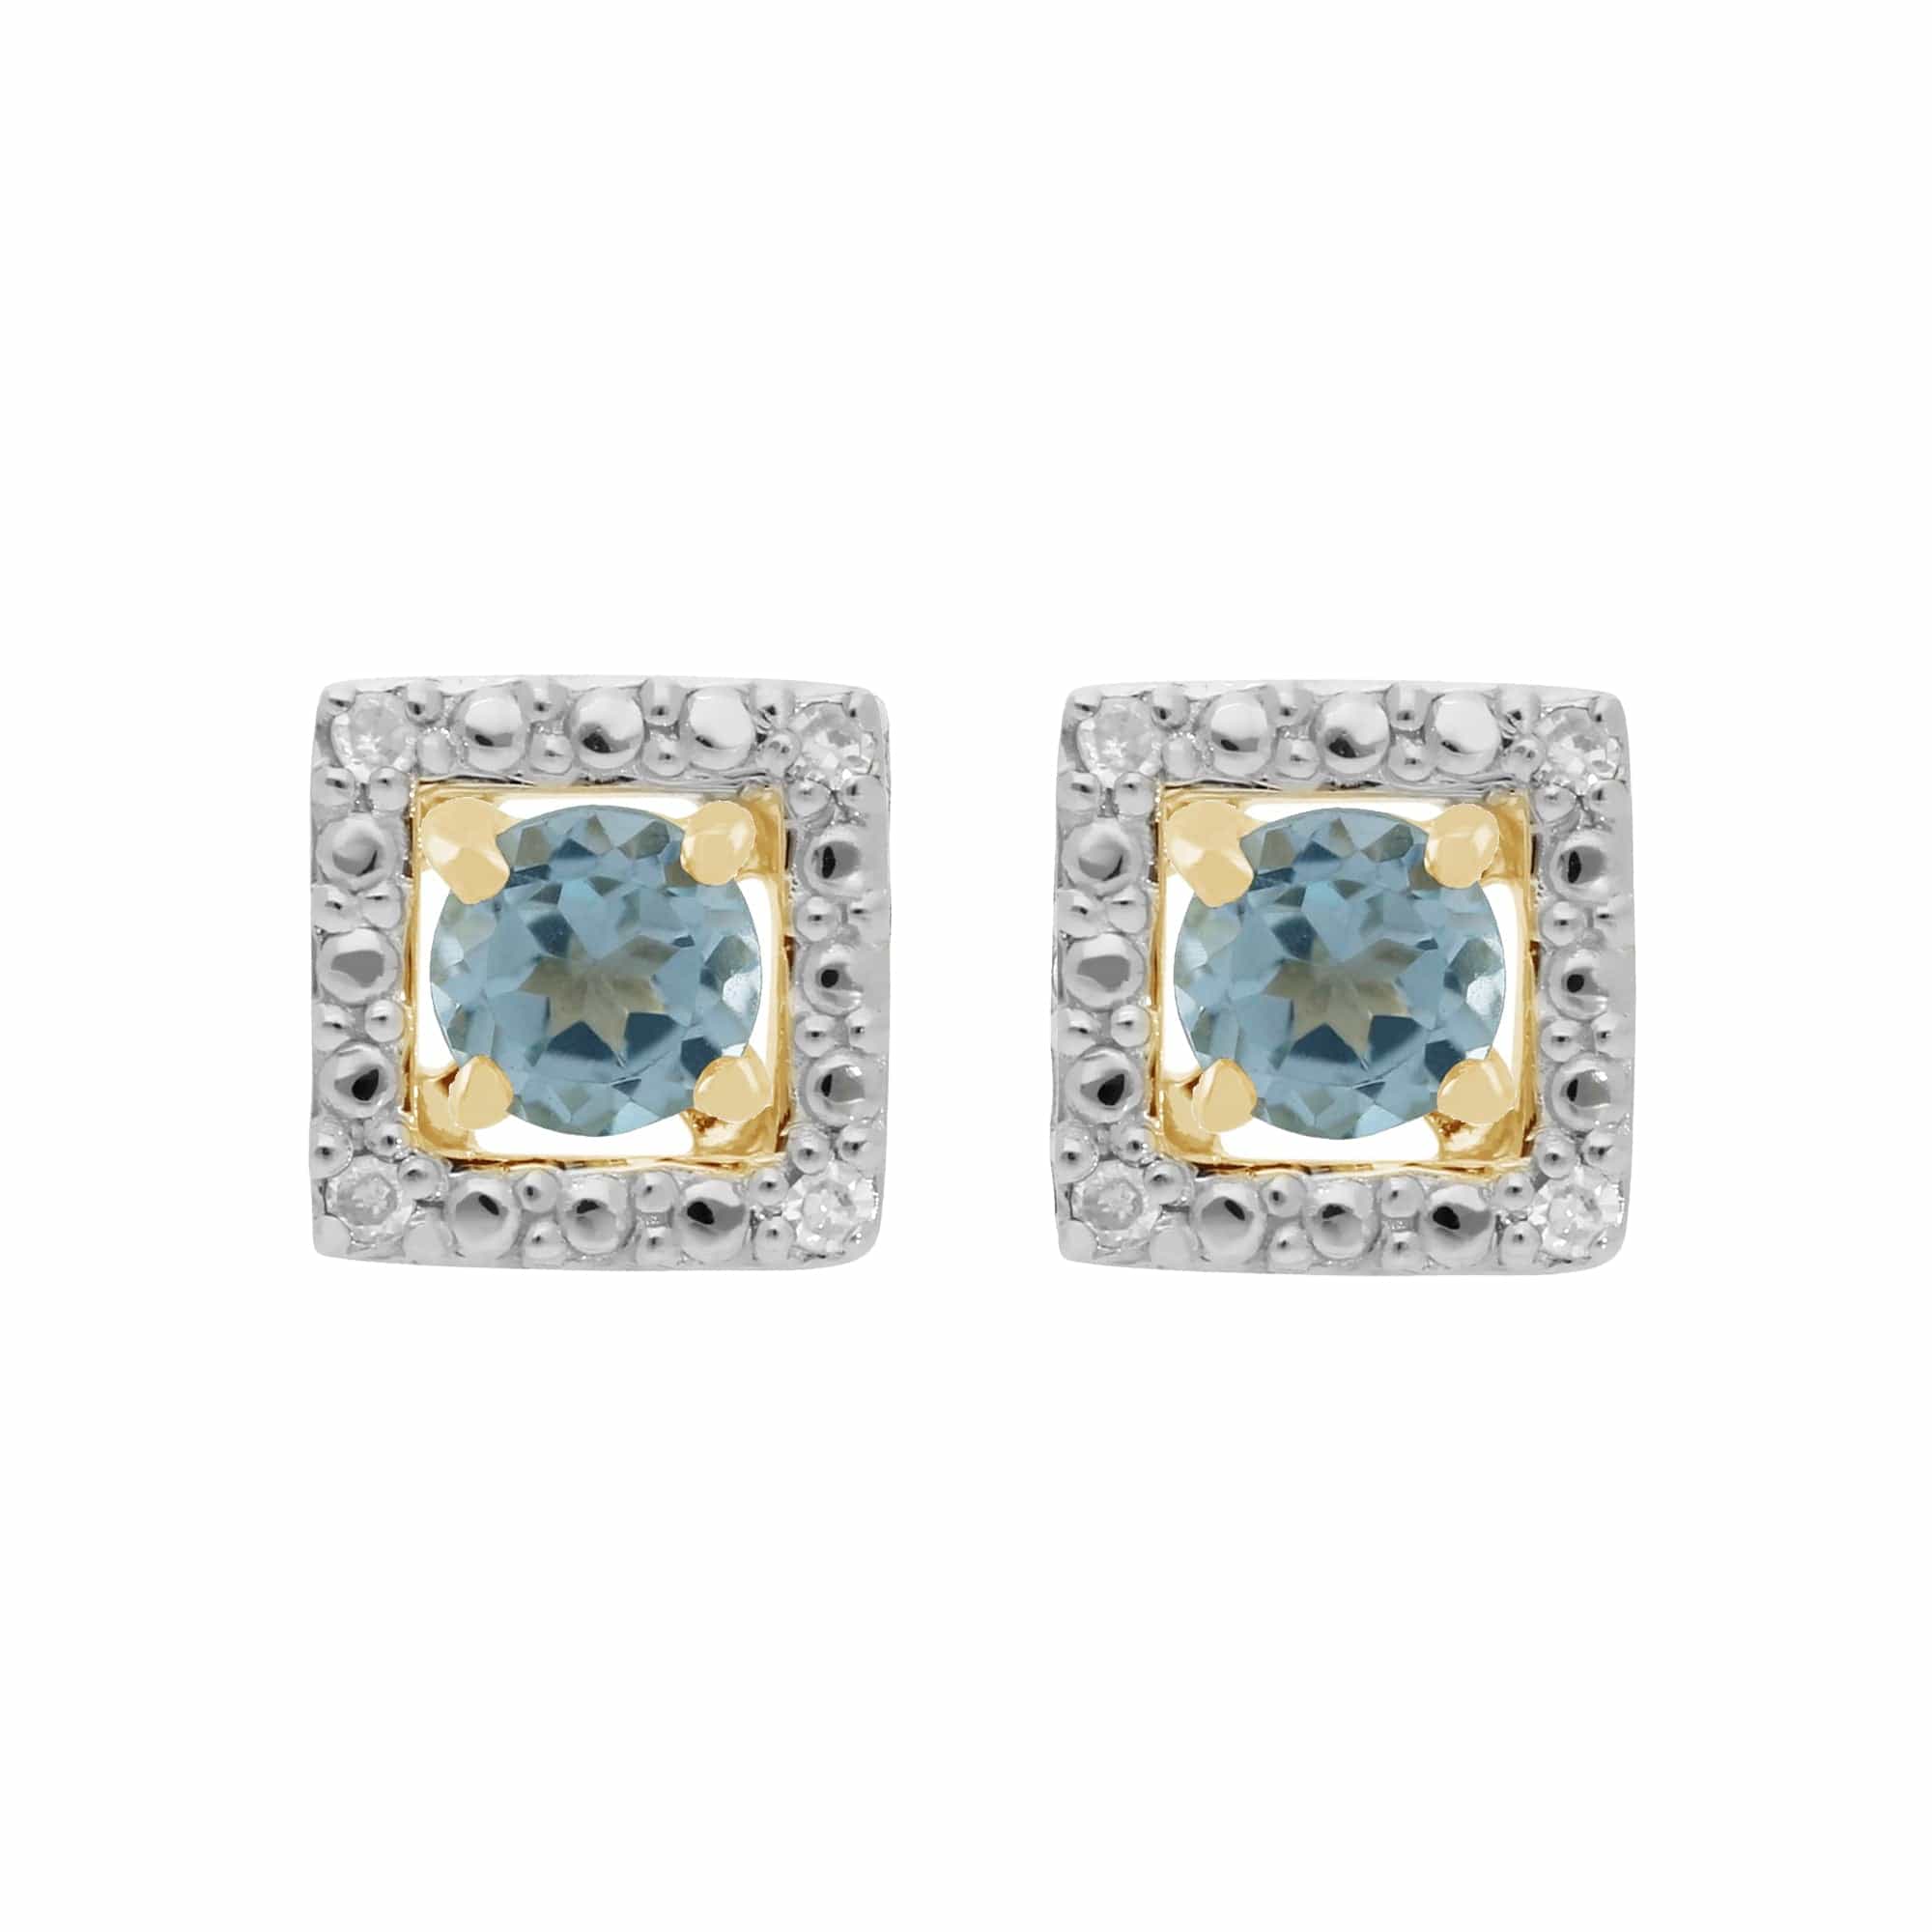 11555-191E0379019 Classic Round Blue Topaz Stud Earrings with Detachable Diamond Square Earrings Jacket Set in 9ct Yellow Gold 1